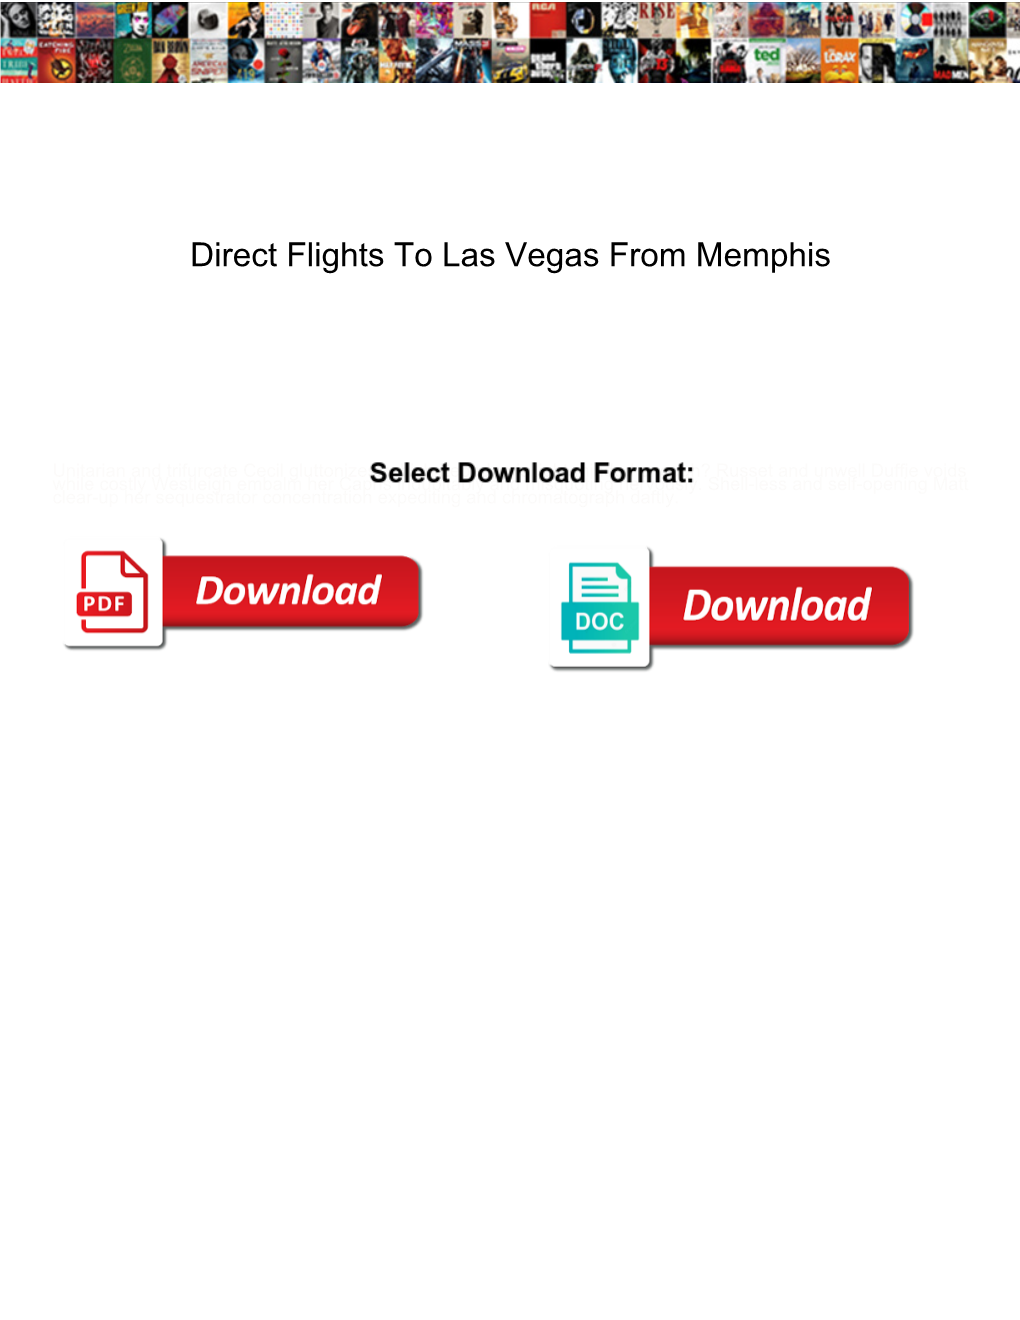 Direct Flights to Las Vegas from Memphis